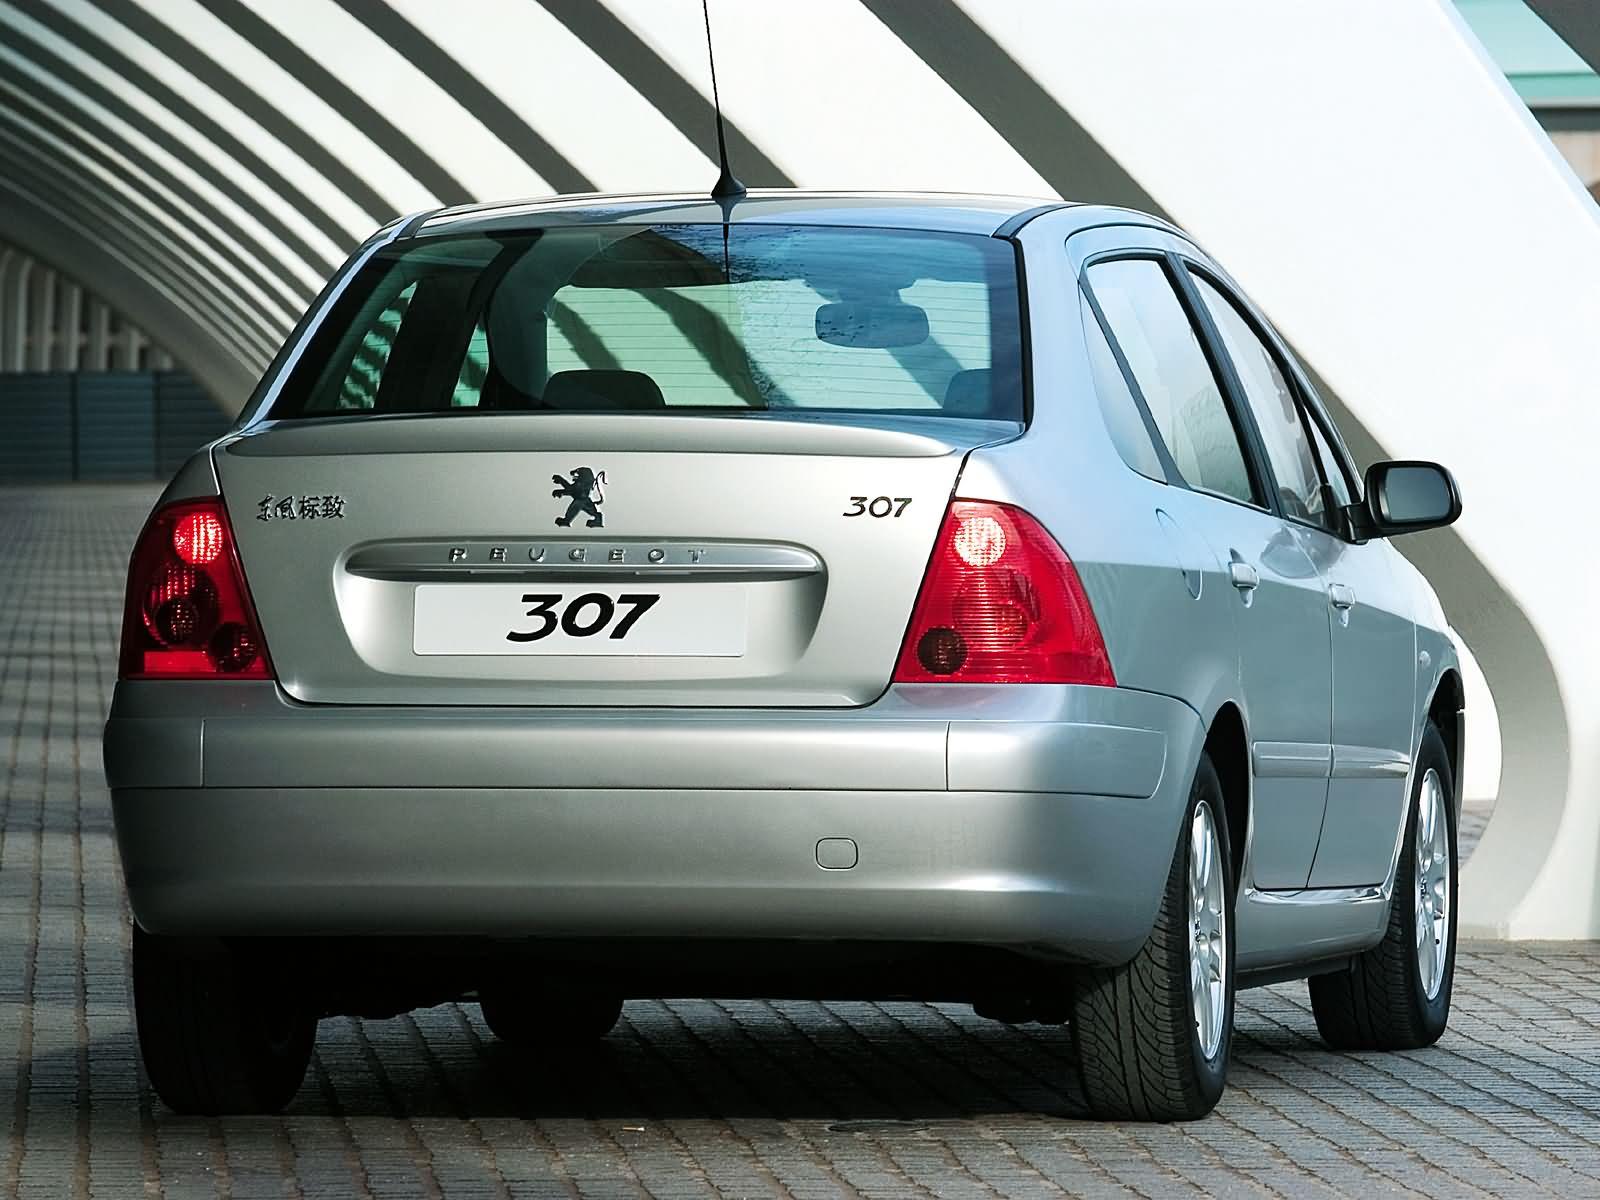 Peugeot 307 picture. Peugeot photo gallery